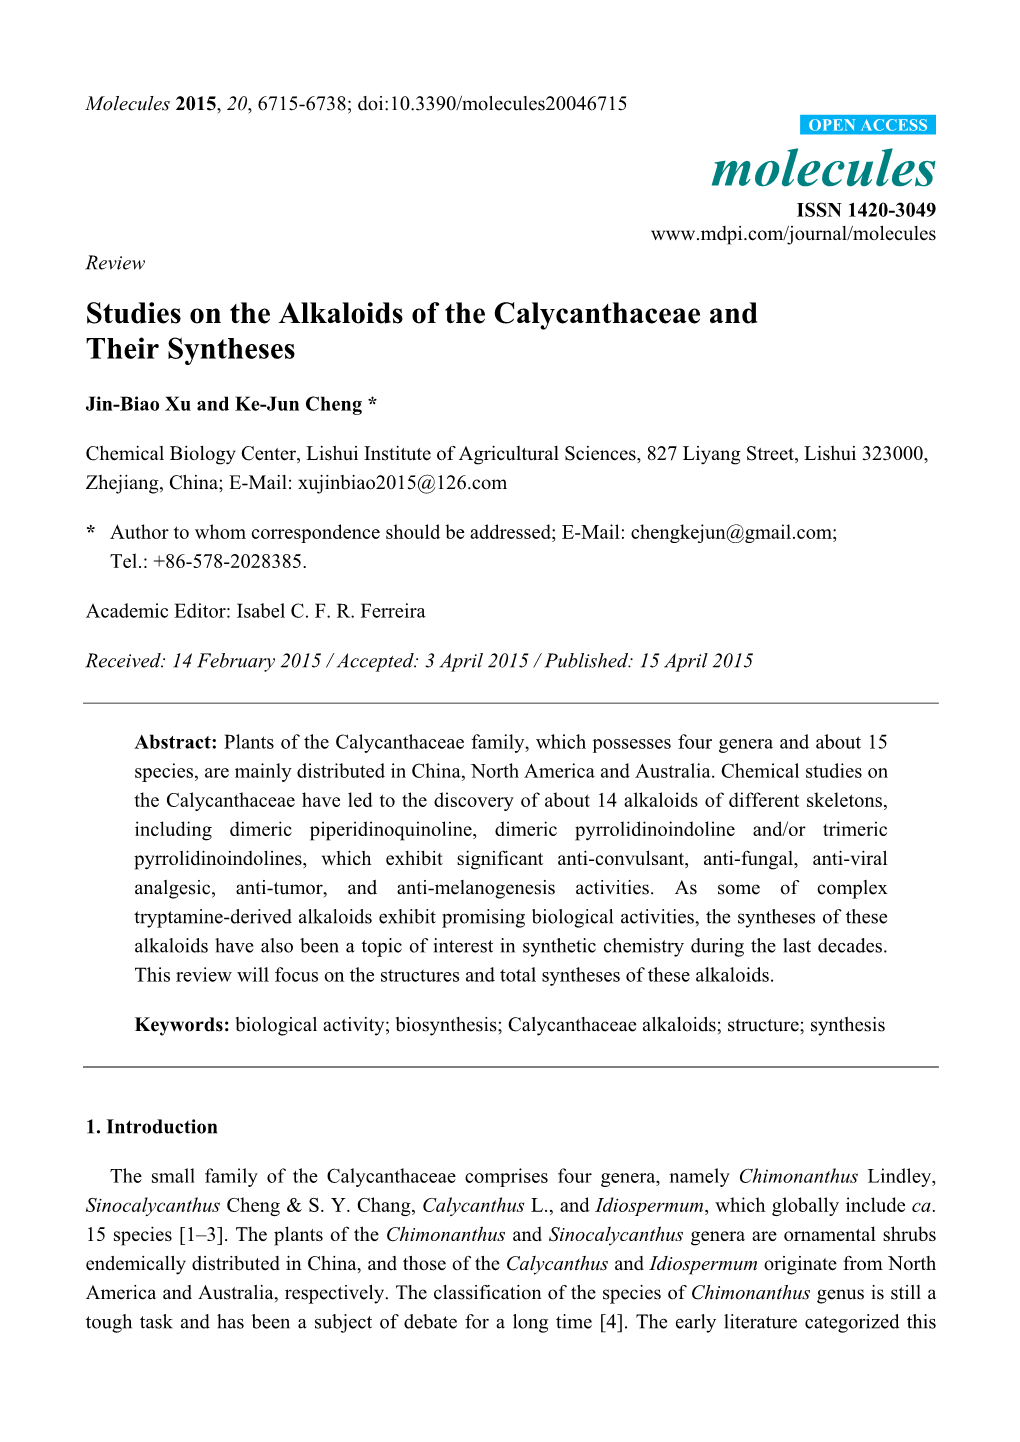 Studies on the Alkaloids of the Calycanthaceae and Their Syntheses